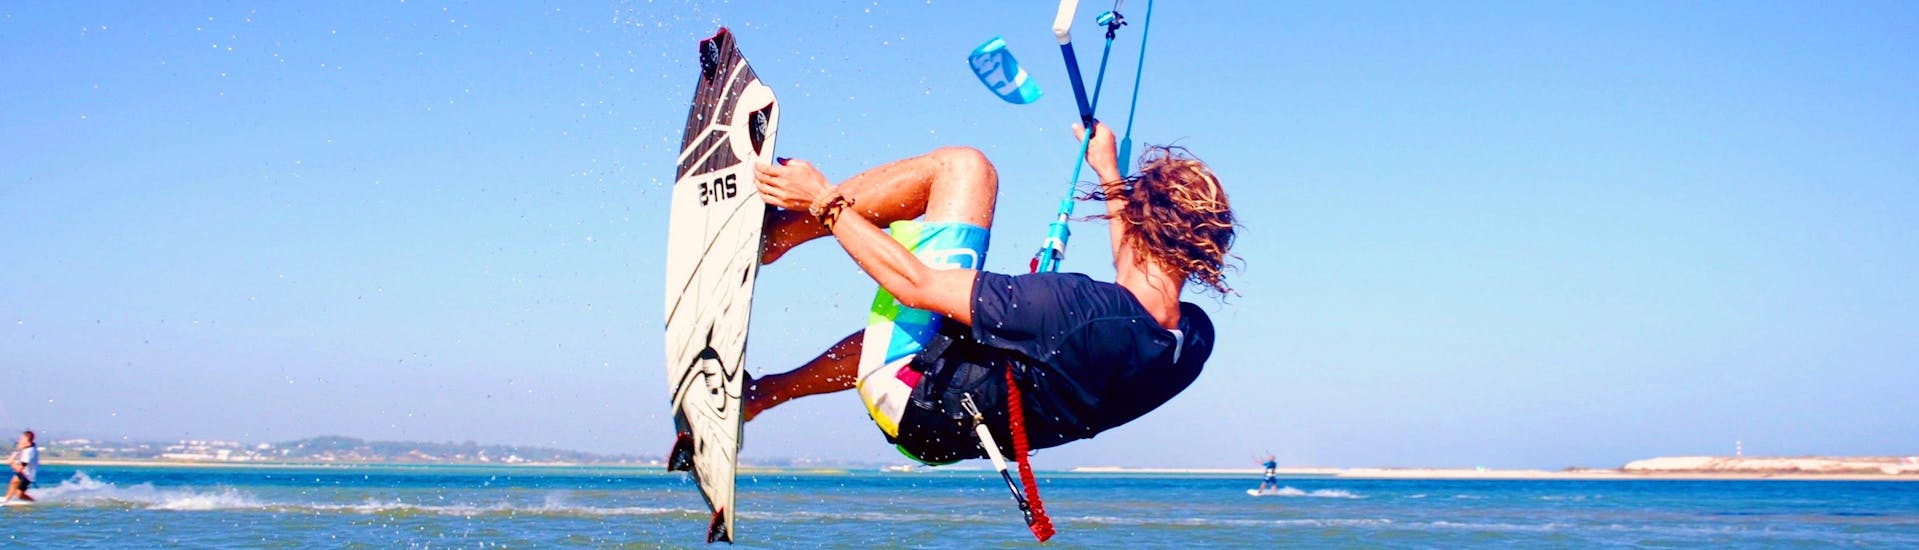 During the Private Kitesurfing Lessons in Fuseta for All Levels with Kite Culture Algarve, an advanced kitesurfer is practicing some jumps on the flat water of the Fuseta Lagoon.